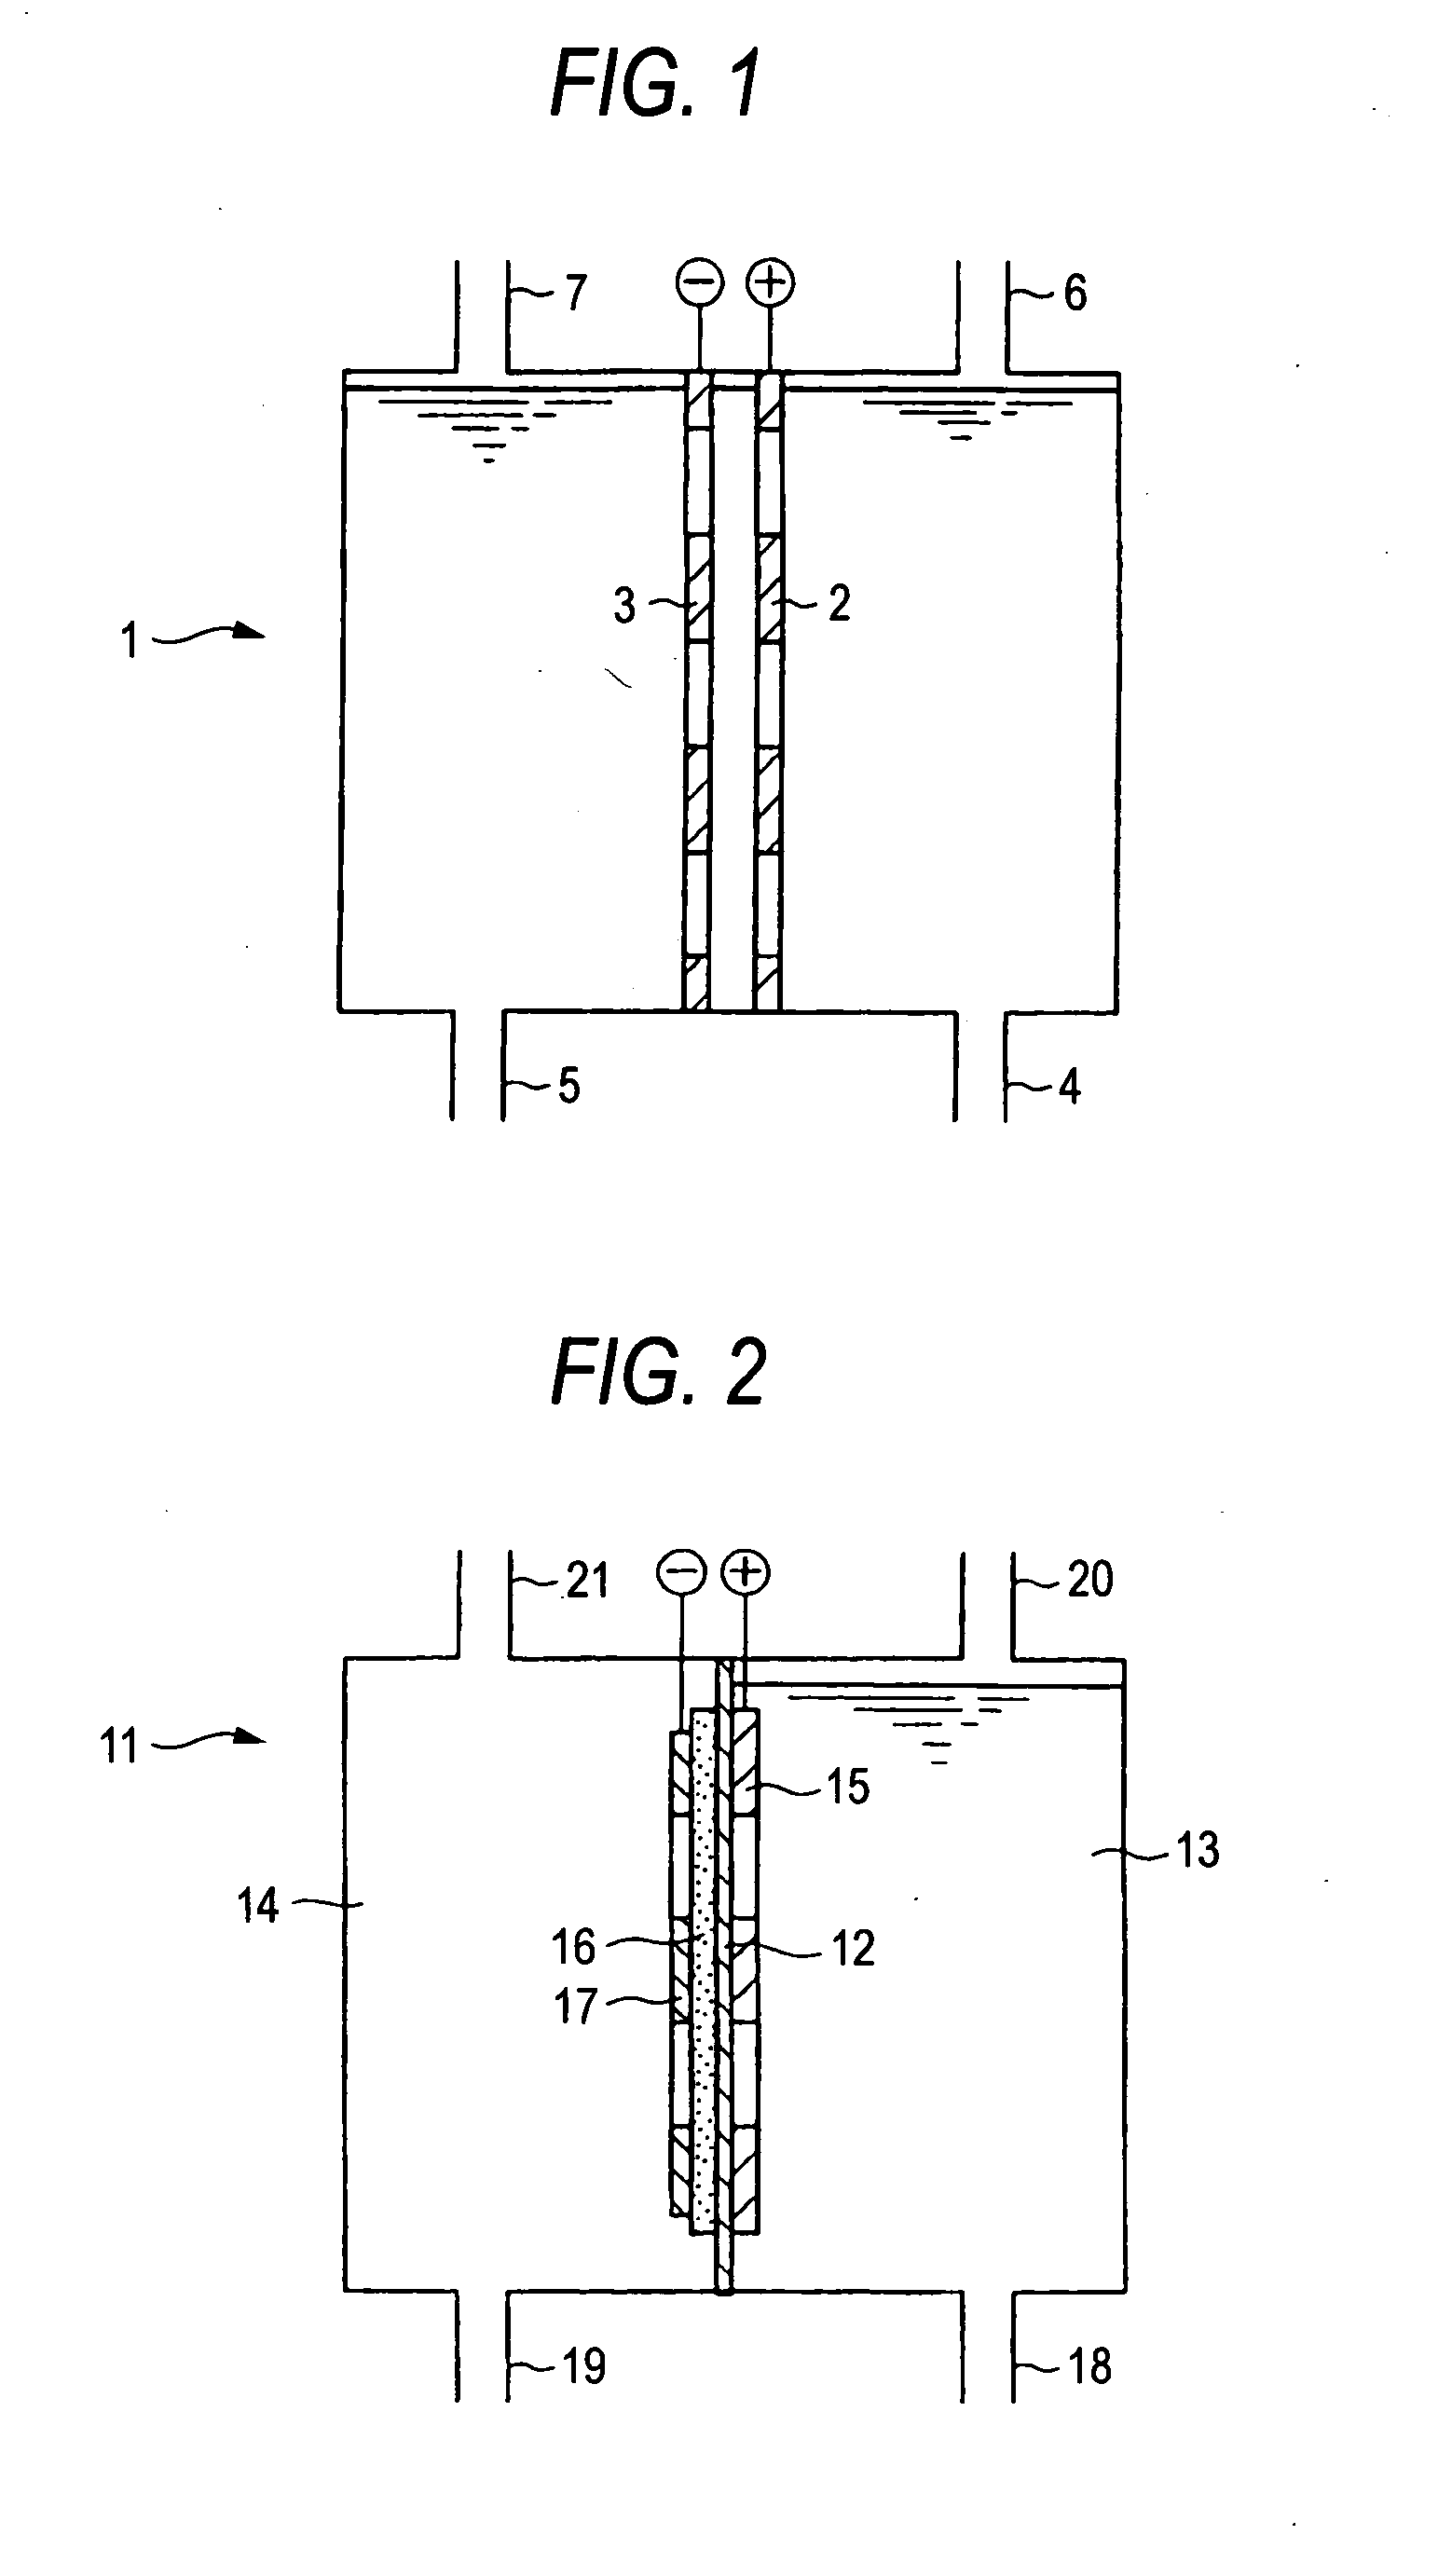 Electrolysis cell for synthesizing perchloric acid compound and method for electrolytically synthesizing perchloric acid compound